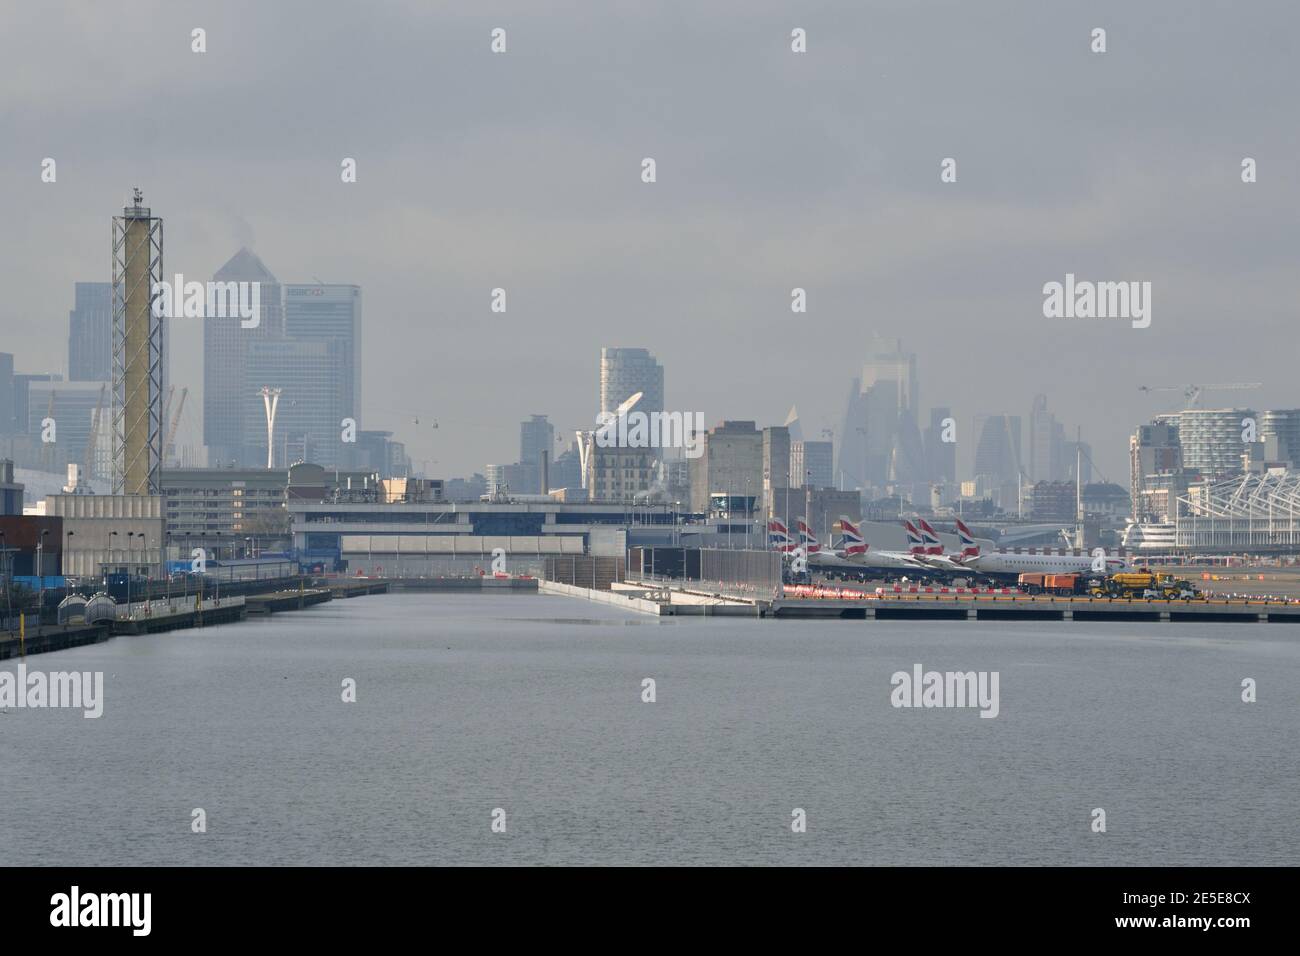 London City Airport using remote (virtual) Air Traffic Control (ATC) tower to guide planes at the airport Stock Photo